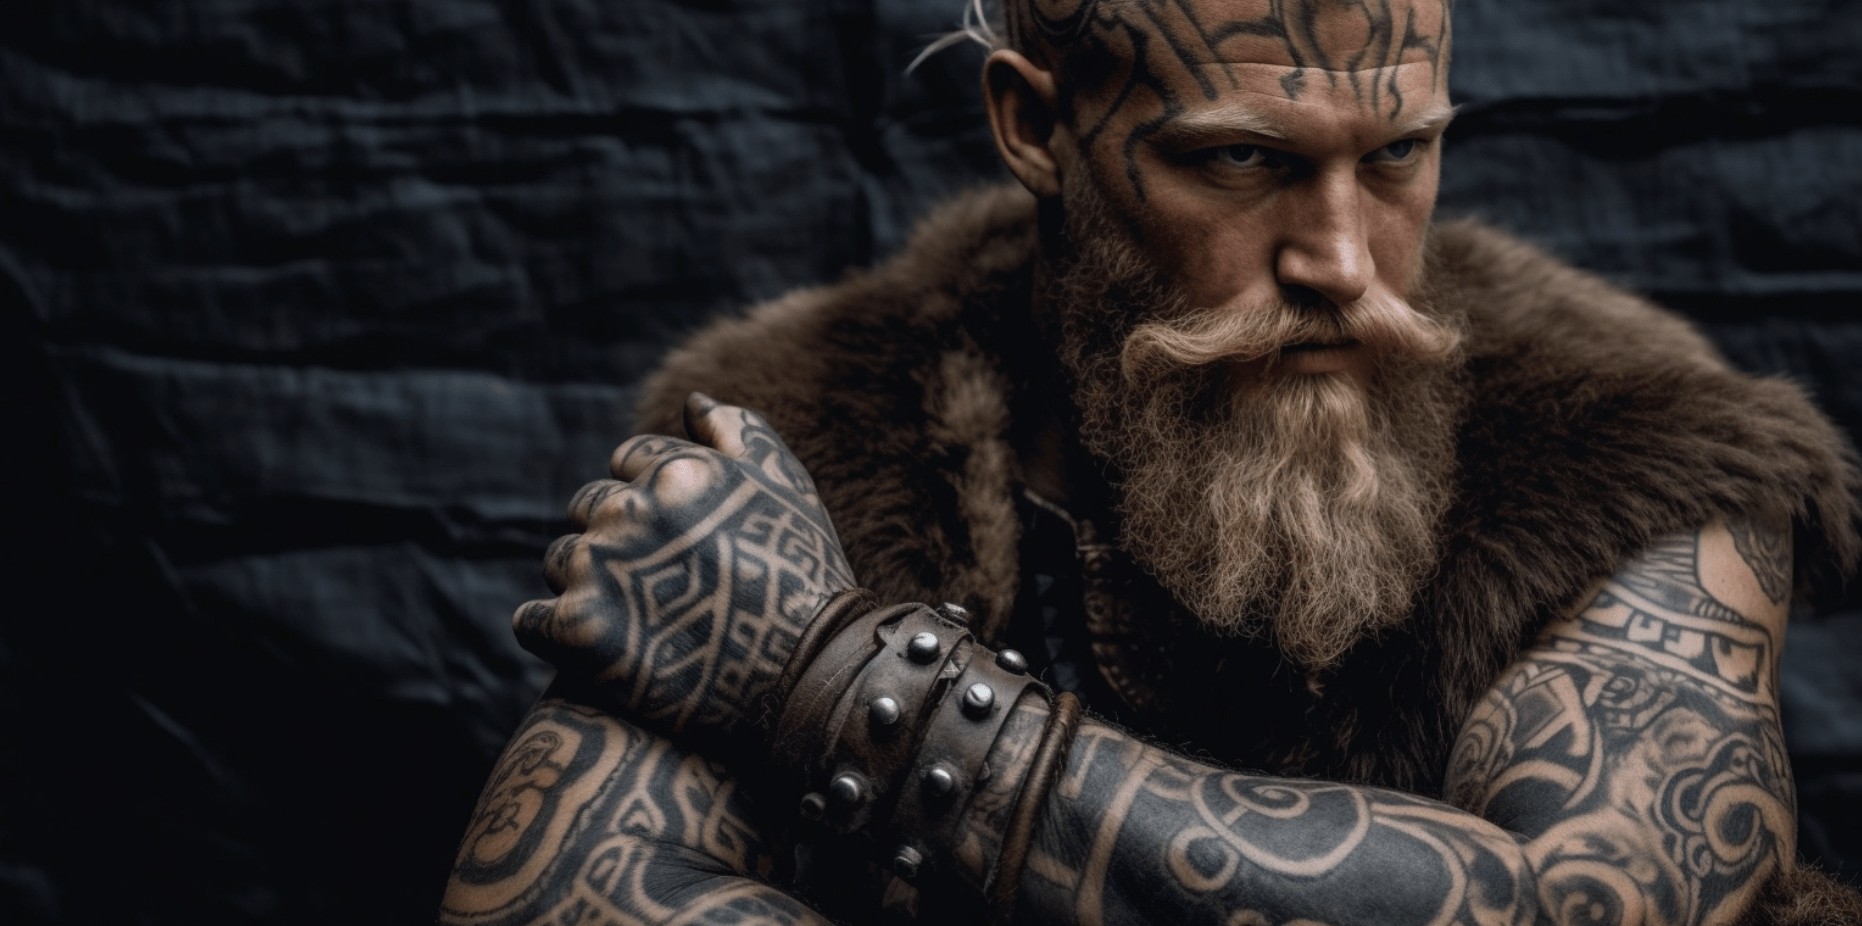 What Are The Best Nordic Viking Hand Tattoos Ideas? - Viking Style